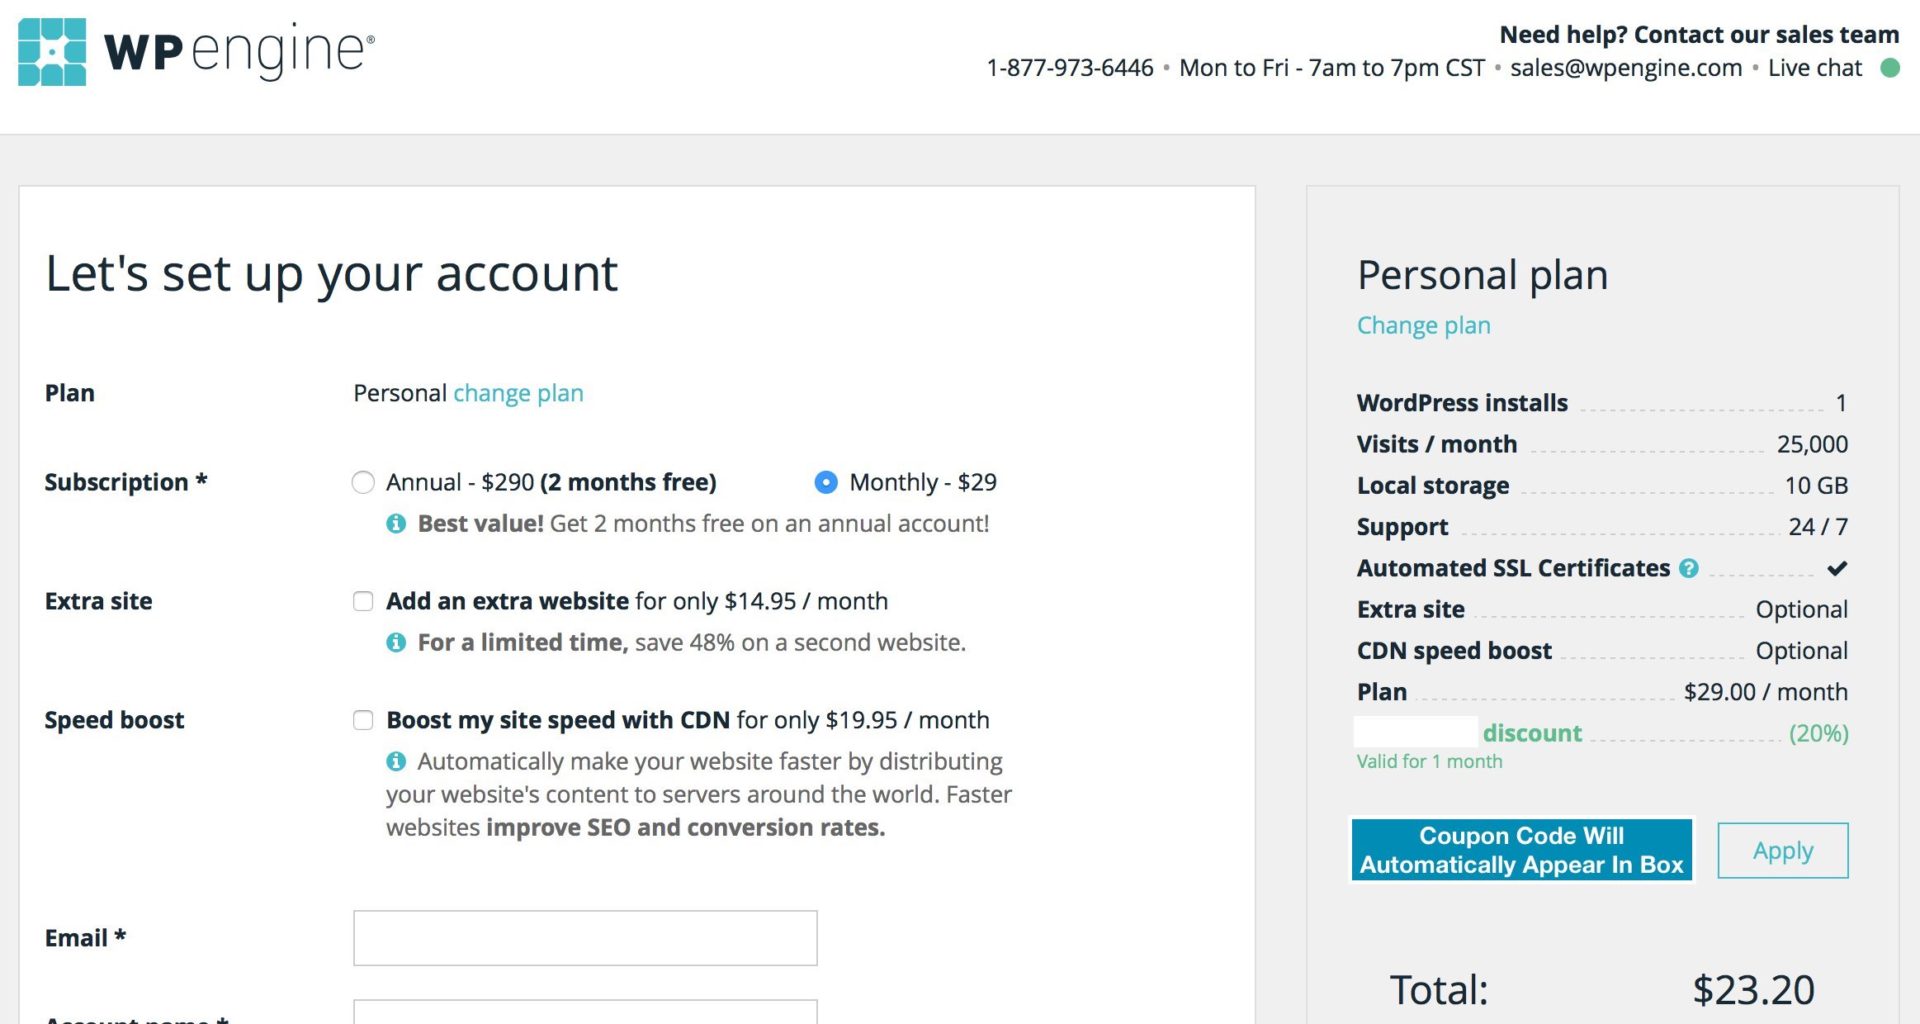 wp engine set up your account coupon code automatically entered